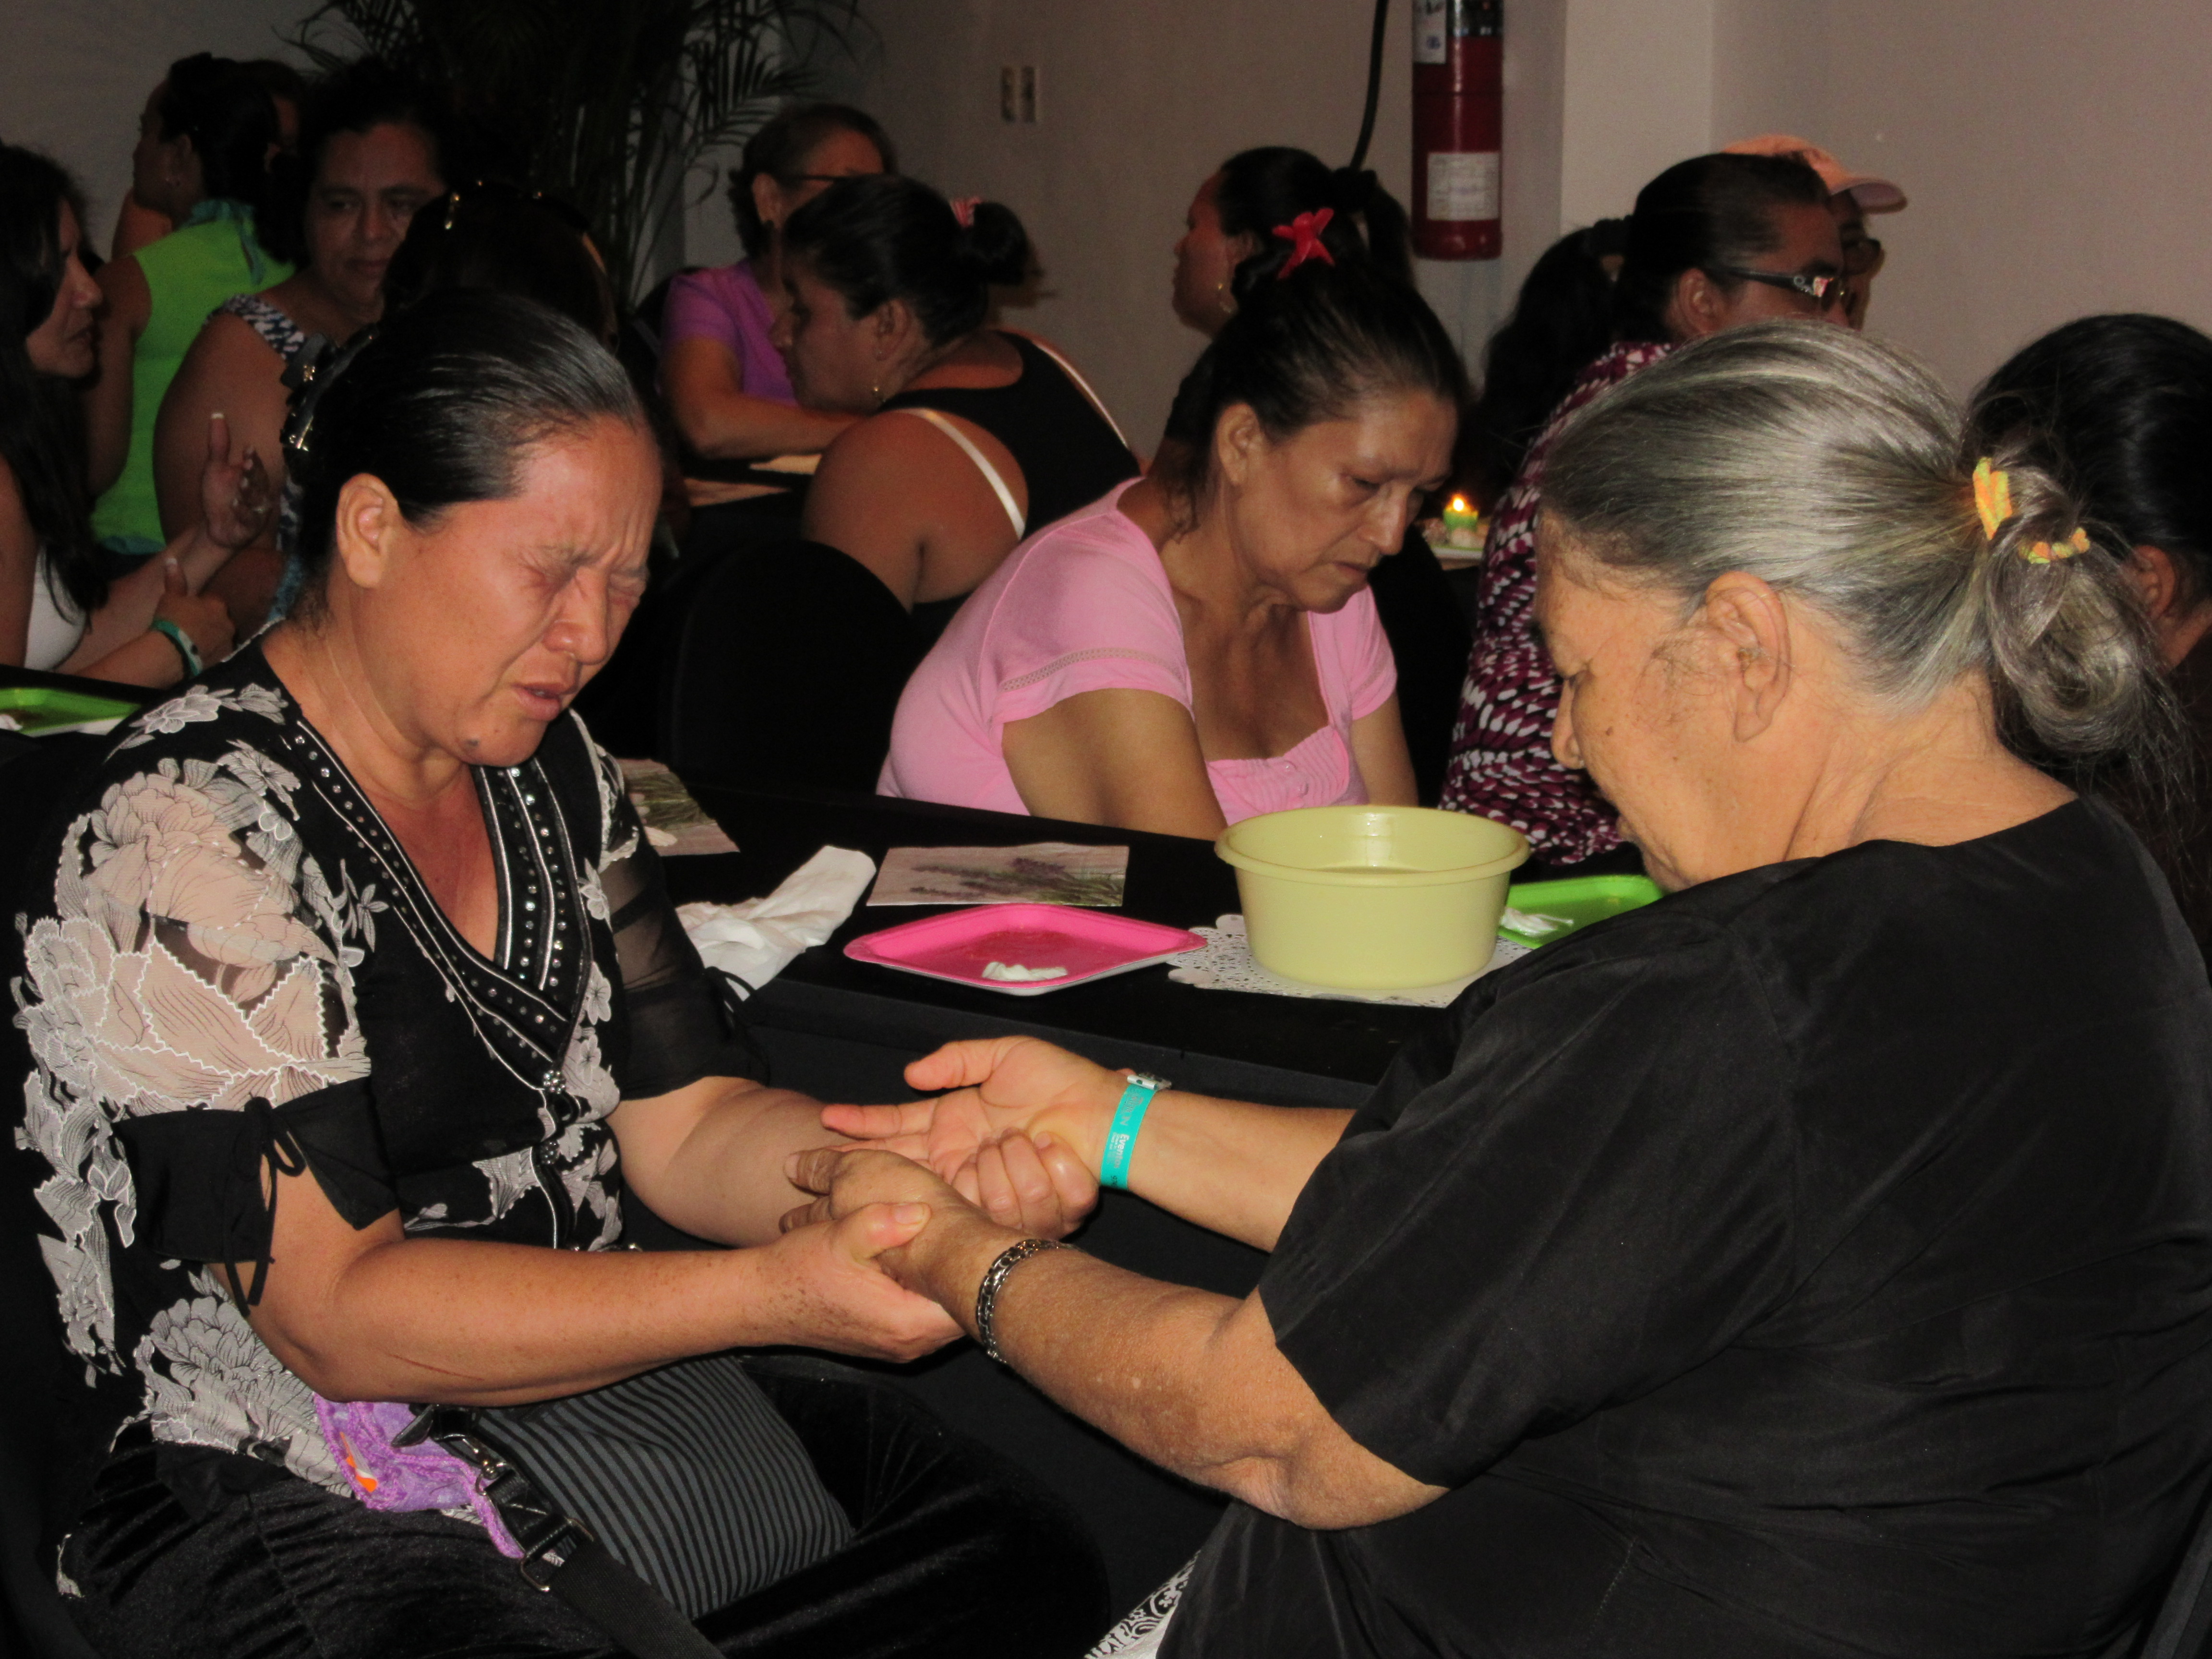 Wives connecting with God and each other during "Spa"